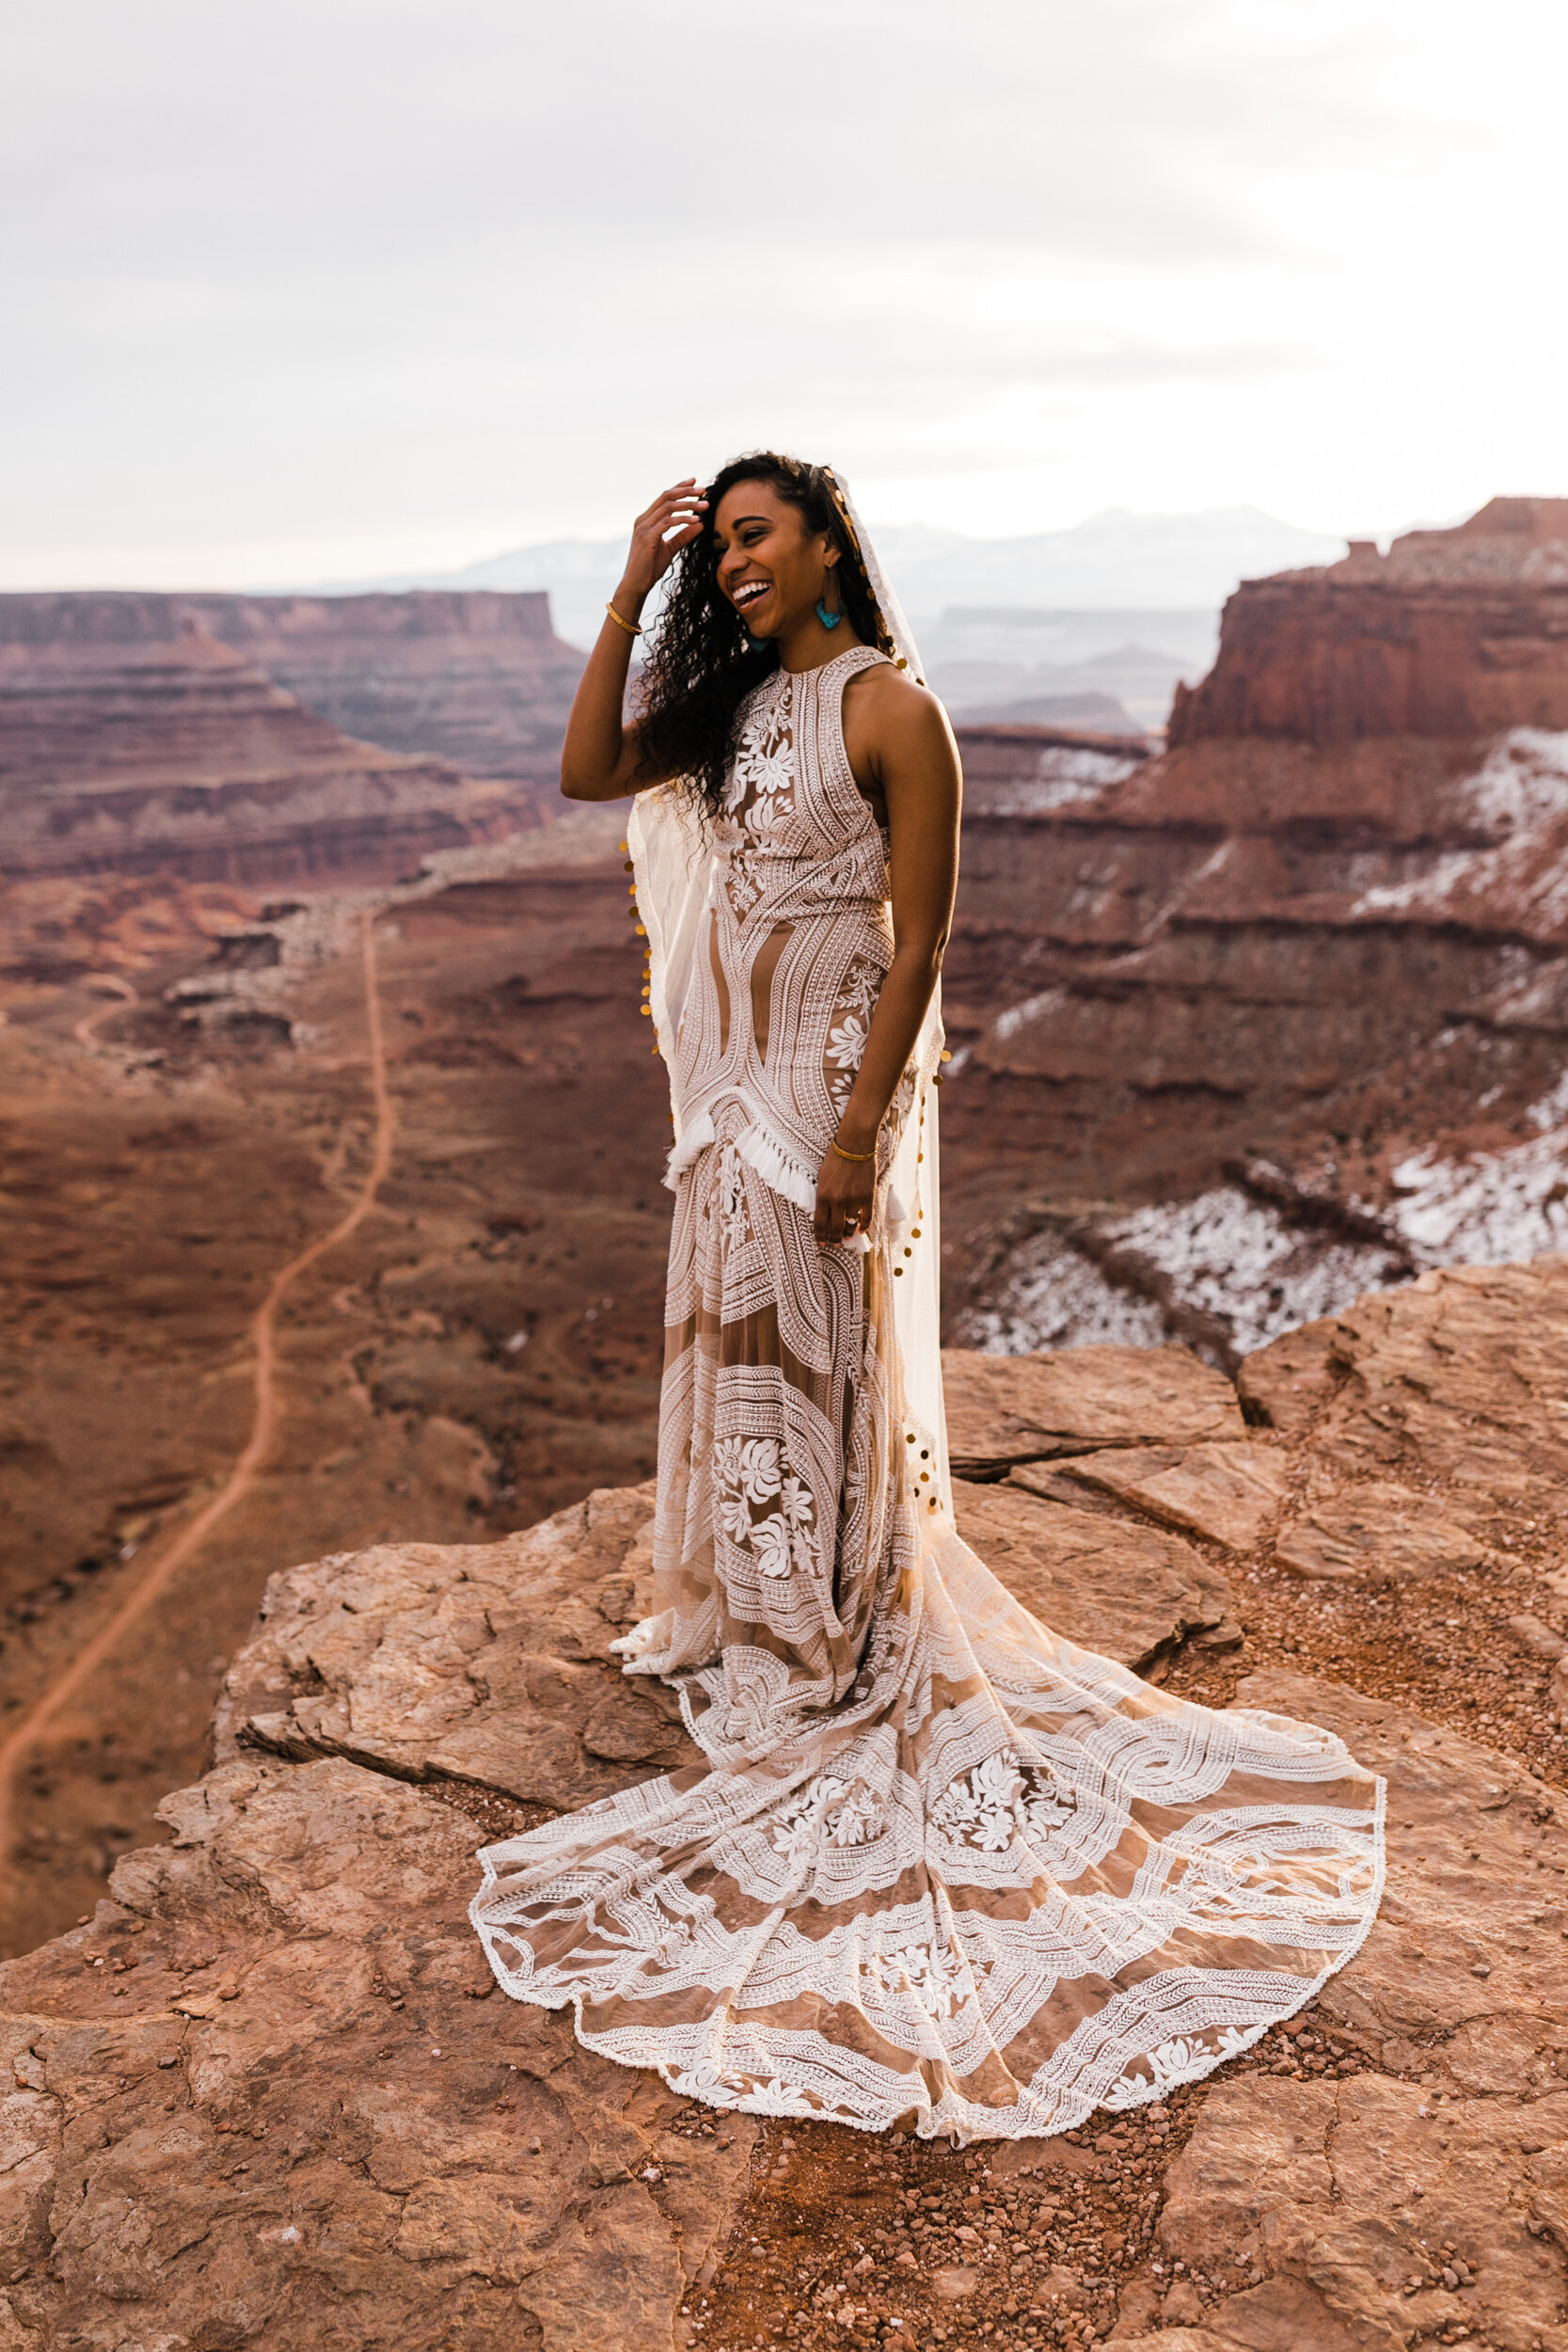 This Moab Elopement in Canyonlands National Park is major desert wedding inspiration! A surprise proposal at sunrise and Rue De Seine East Gown and Gold Coin Veil by The Hearnes Adventure Photography